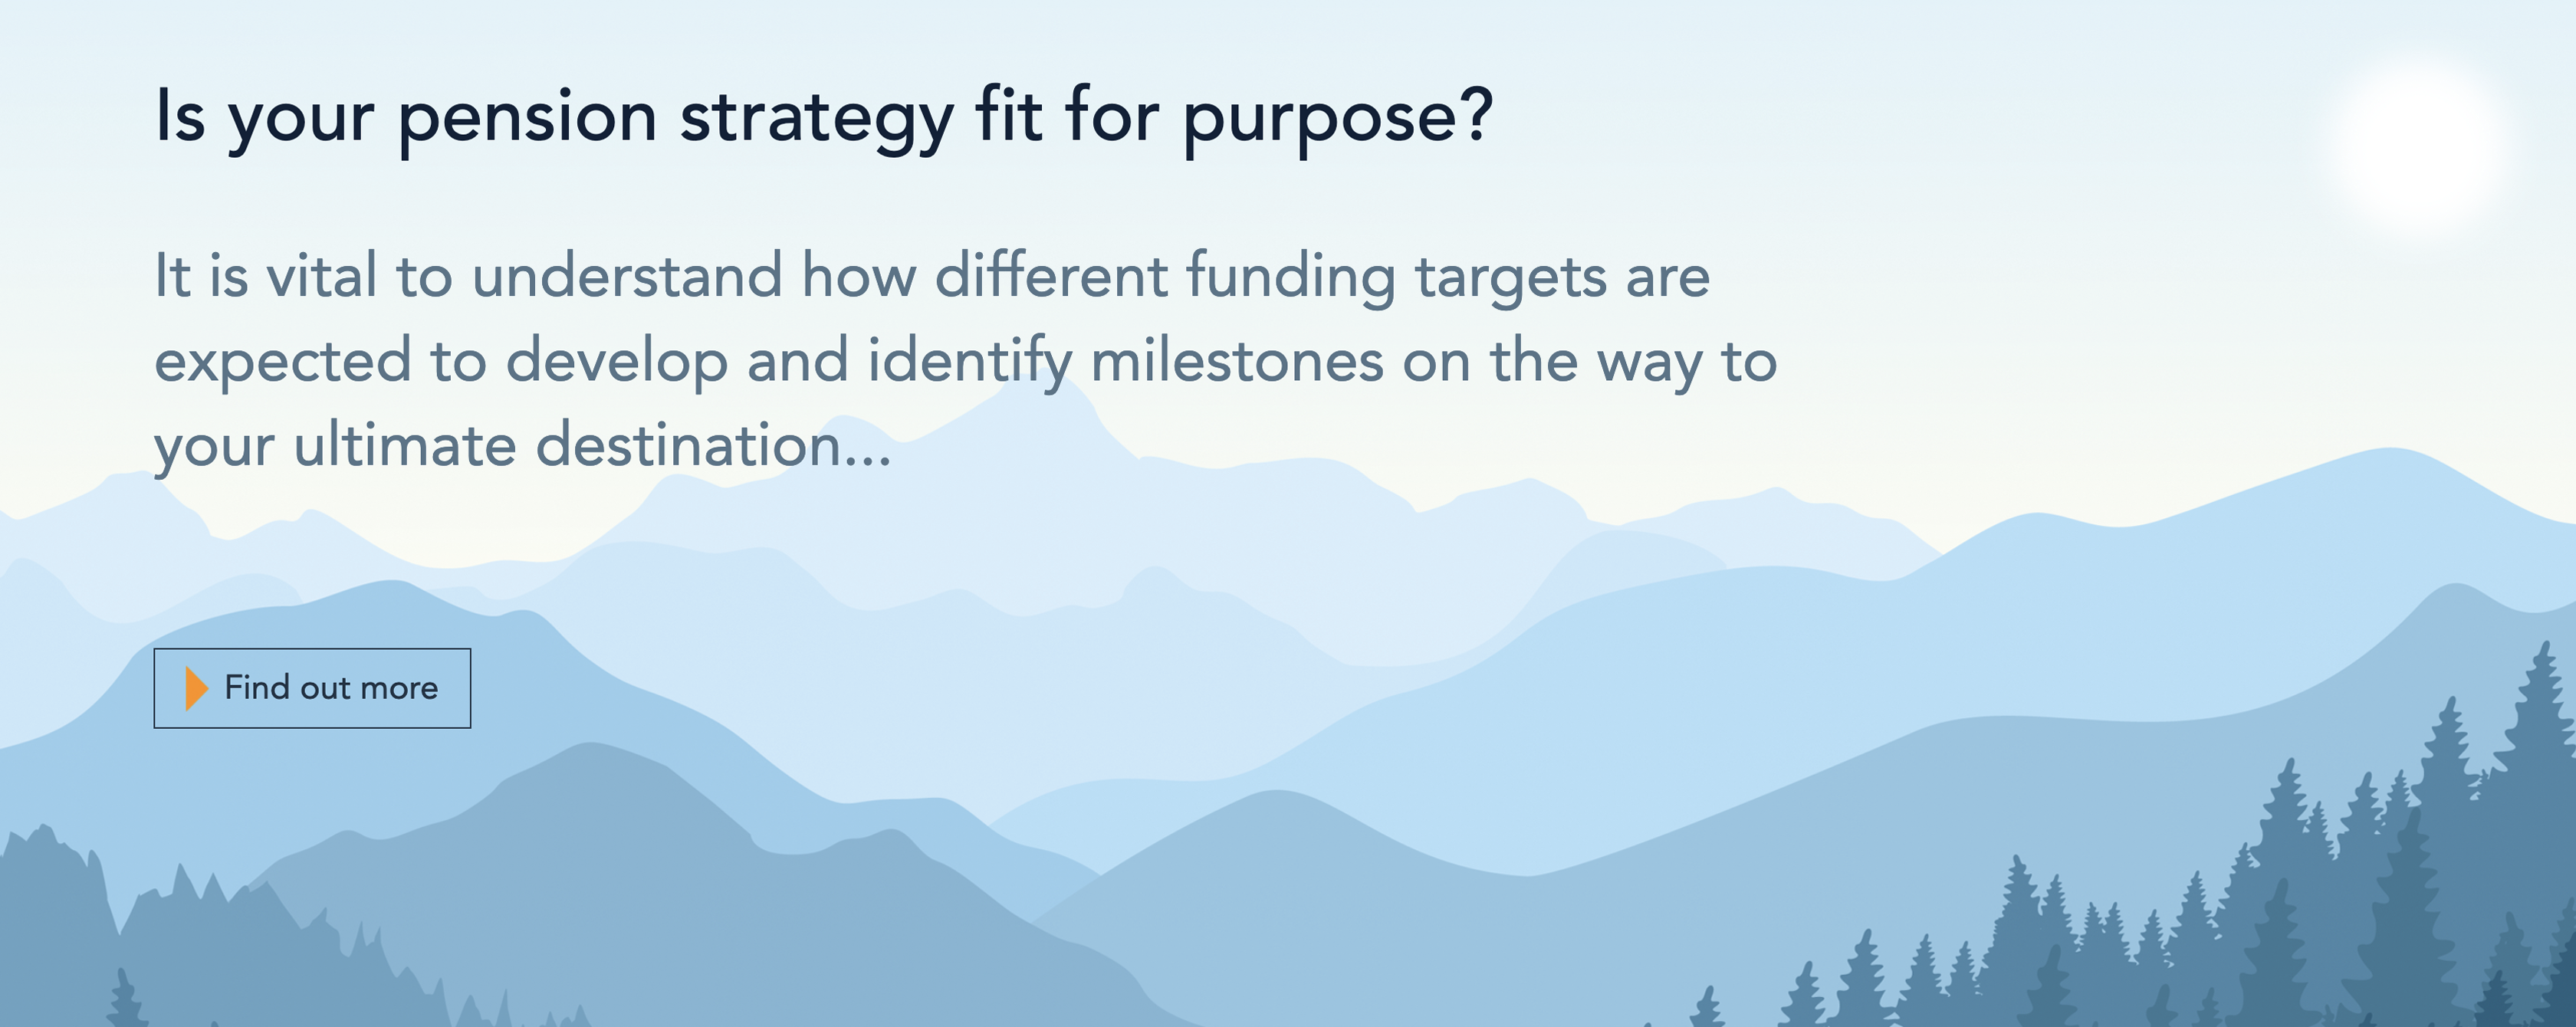 Is your pension strategy fit for purpose? Understand how funding targets are developing... 